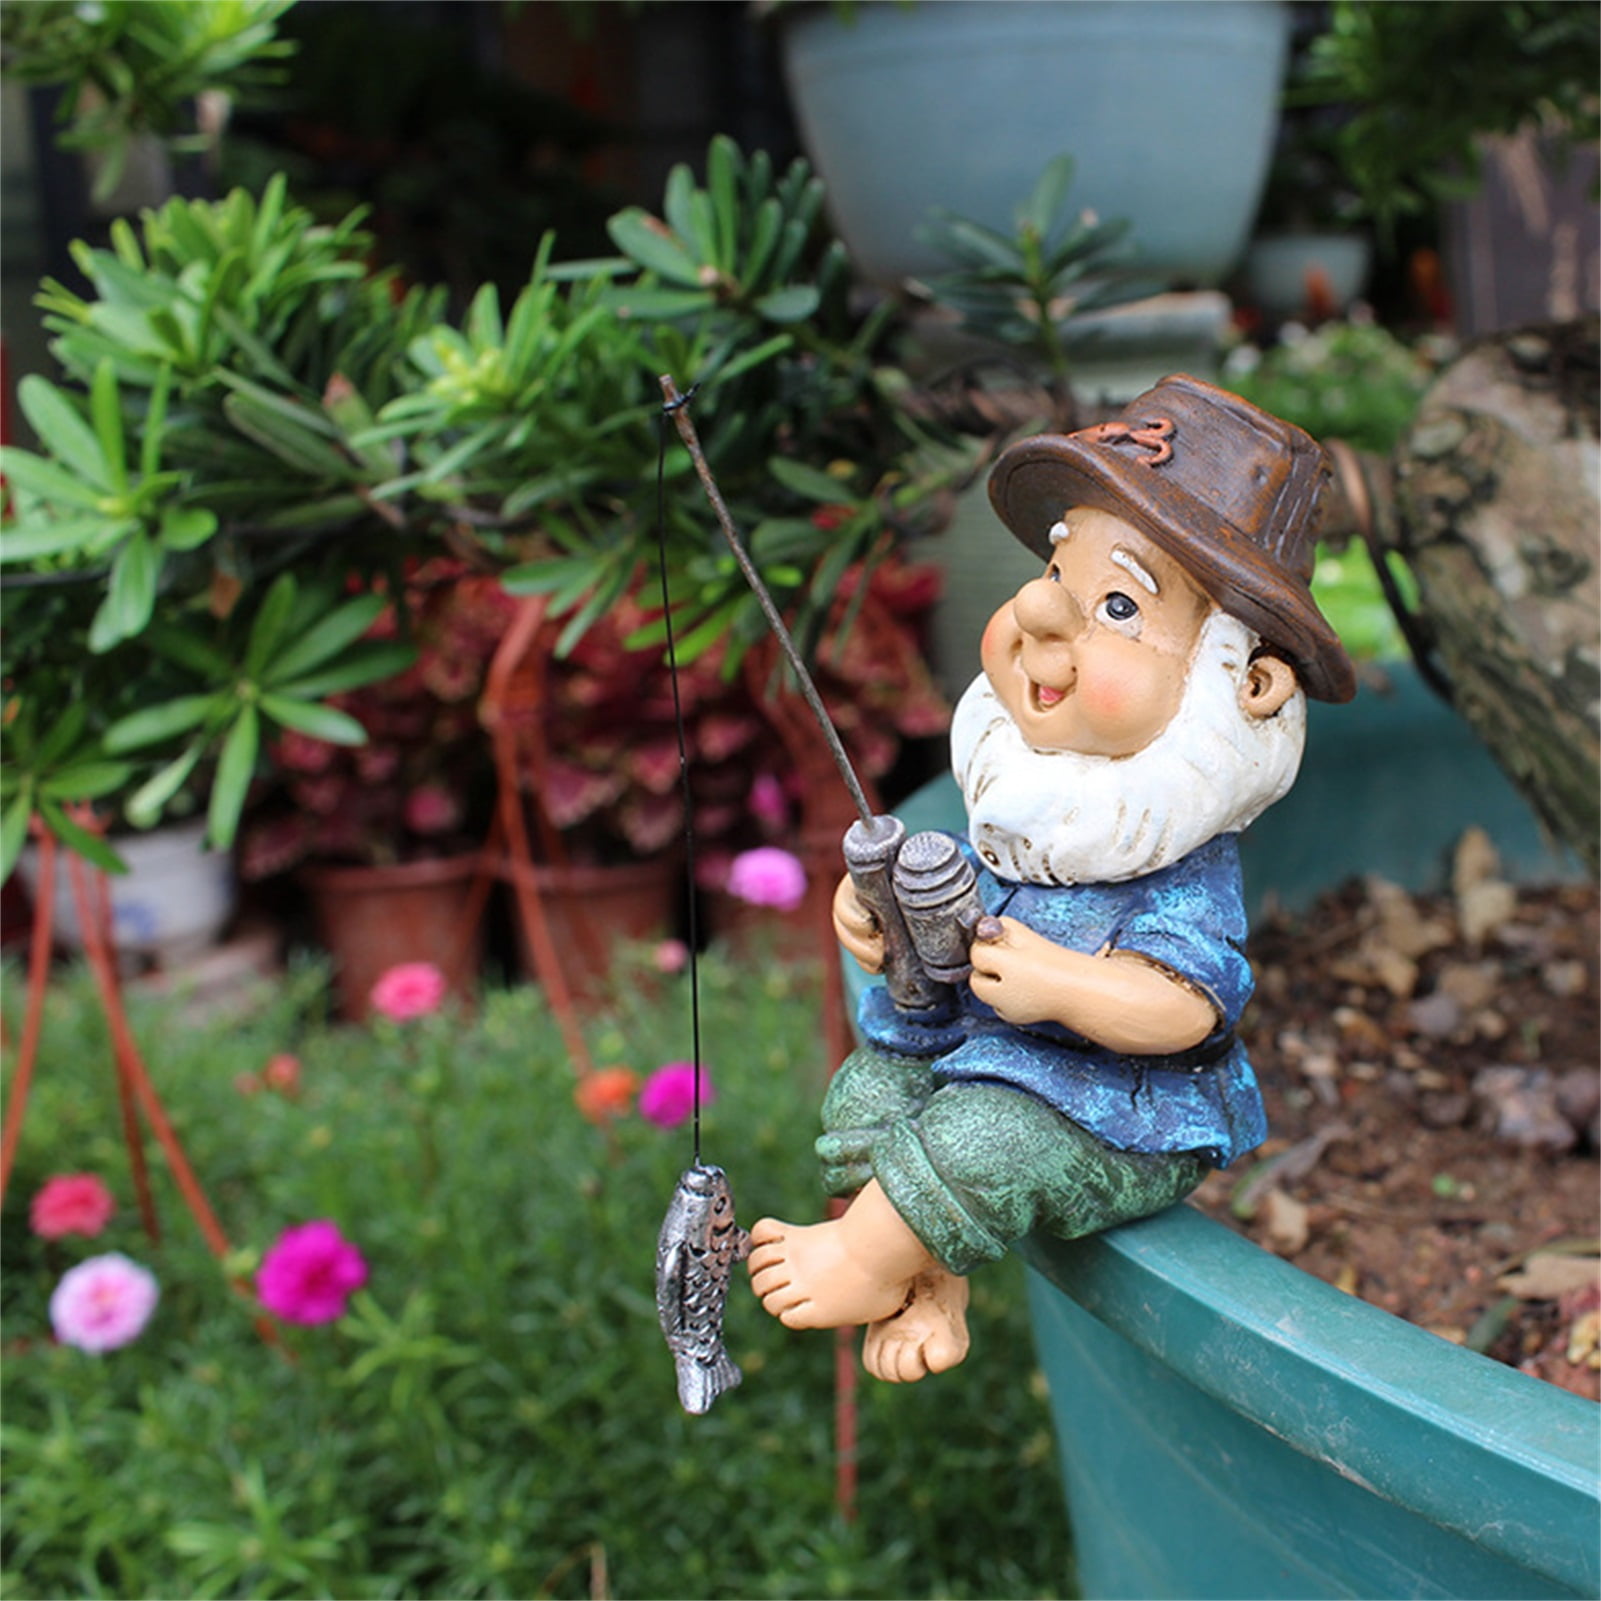 Details about   Handcrafted Sitting Garden Gnome NEW 